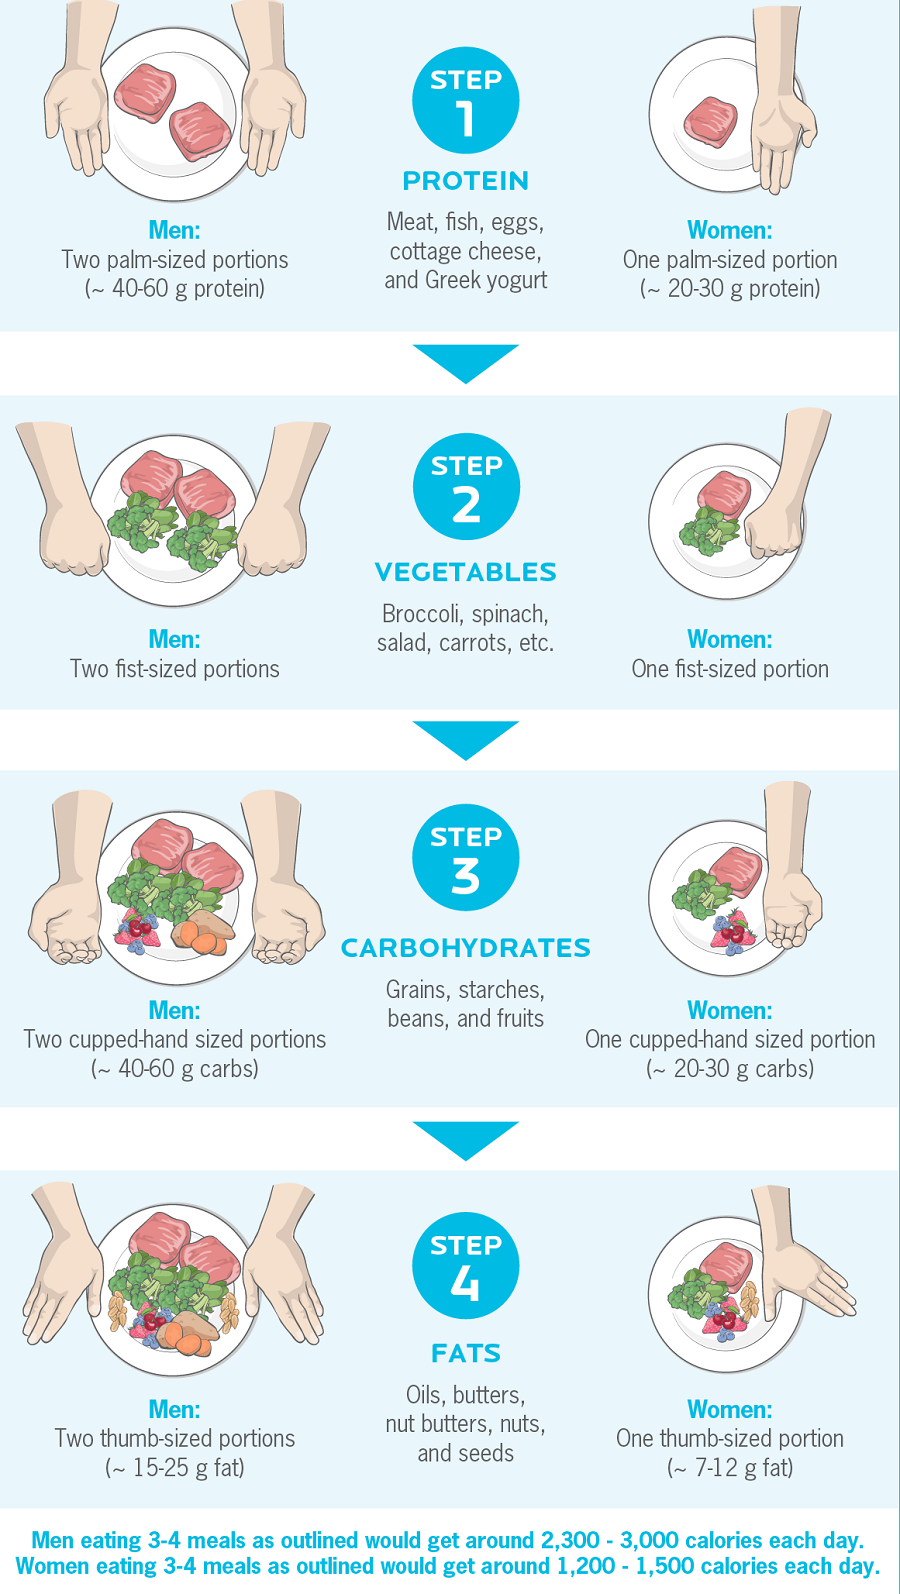 http://www.busyprofitness.com/uploads/1/0/2/2/102273092/the-best-calorie-control-guide-infographic-image_orig.png